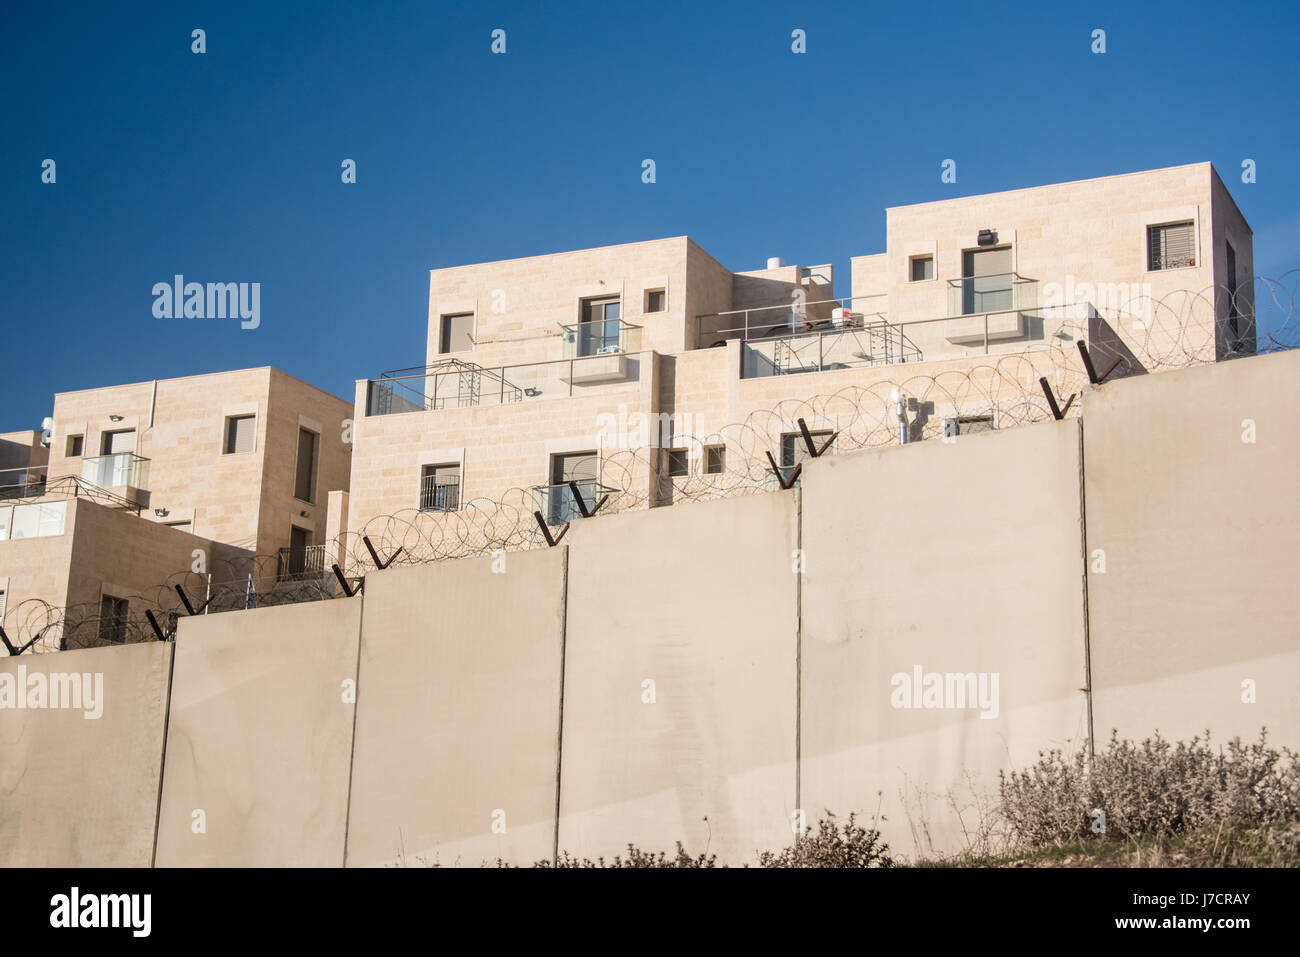 The Israeli Separation Wall encircles the settlement of Har Gilo on land belonging to the West Bank village of Al Walaja, December 30, 2016. Israel's wall and settlements have both been declared illegal according to international law. Stock Photo